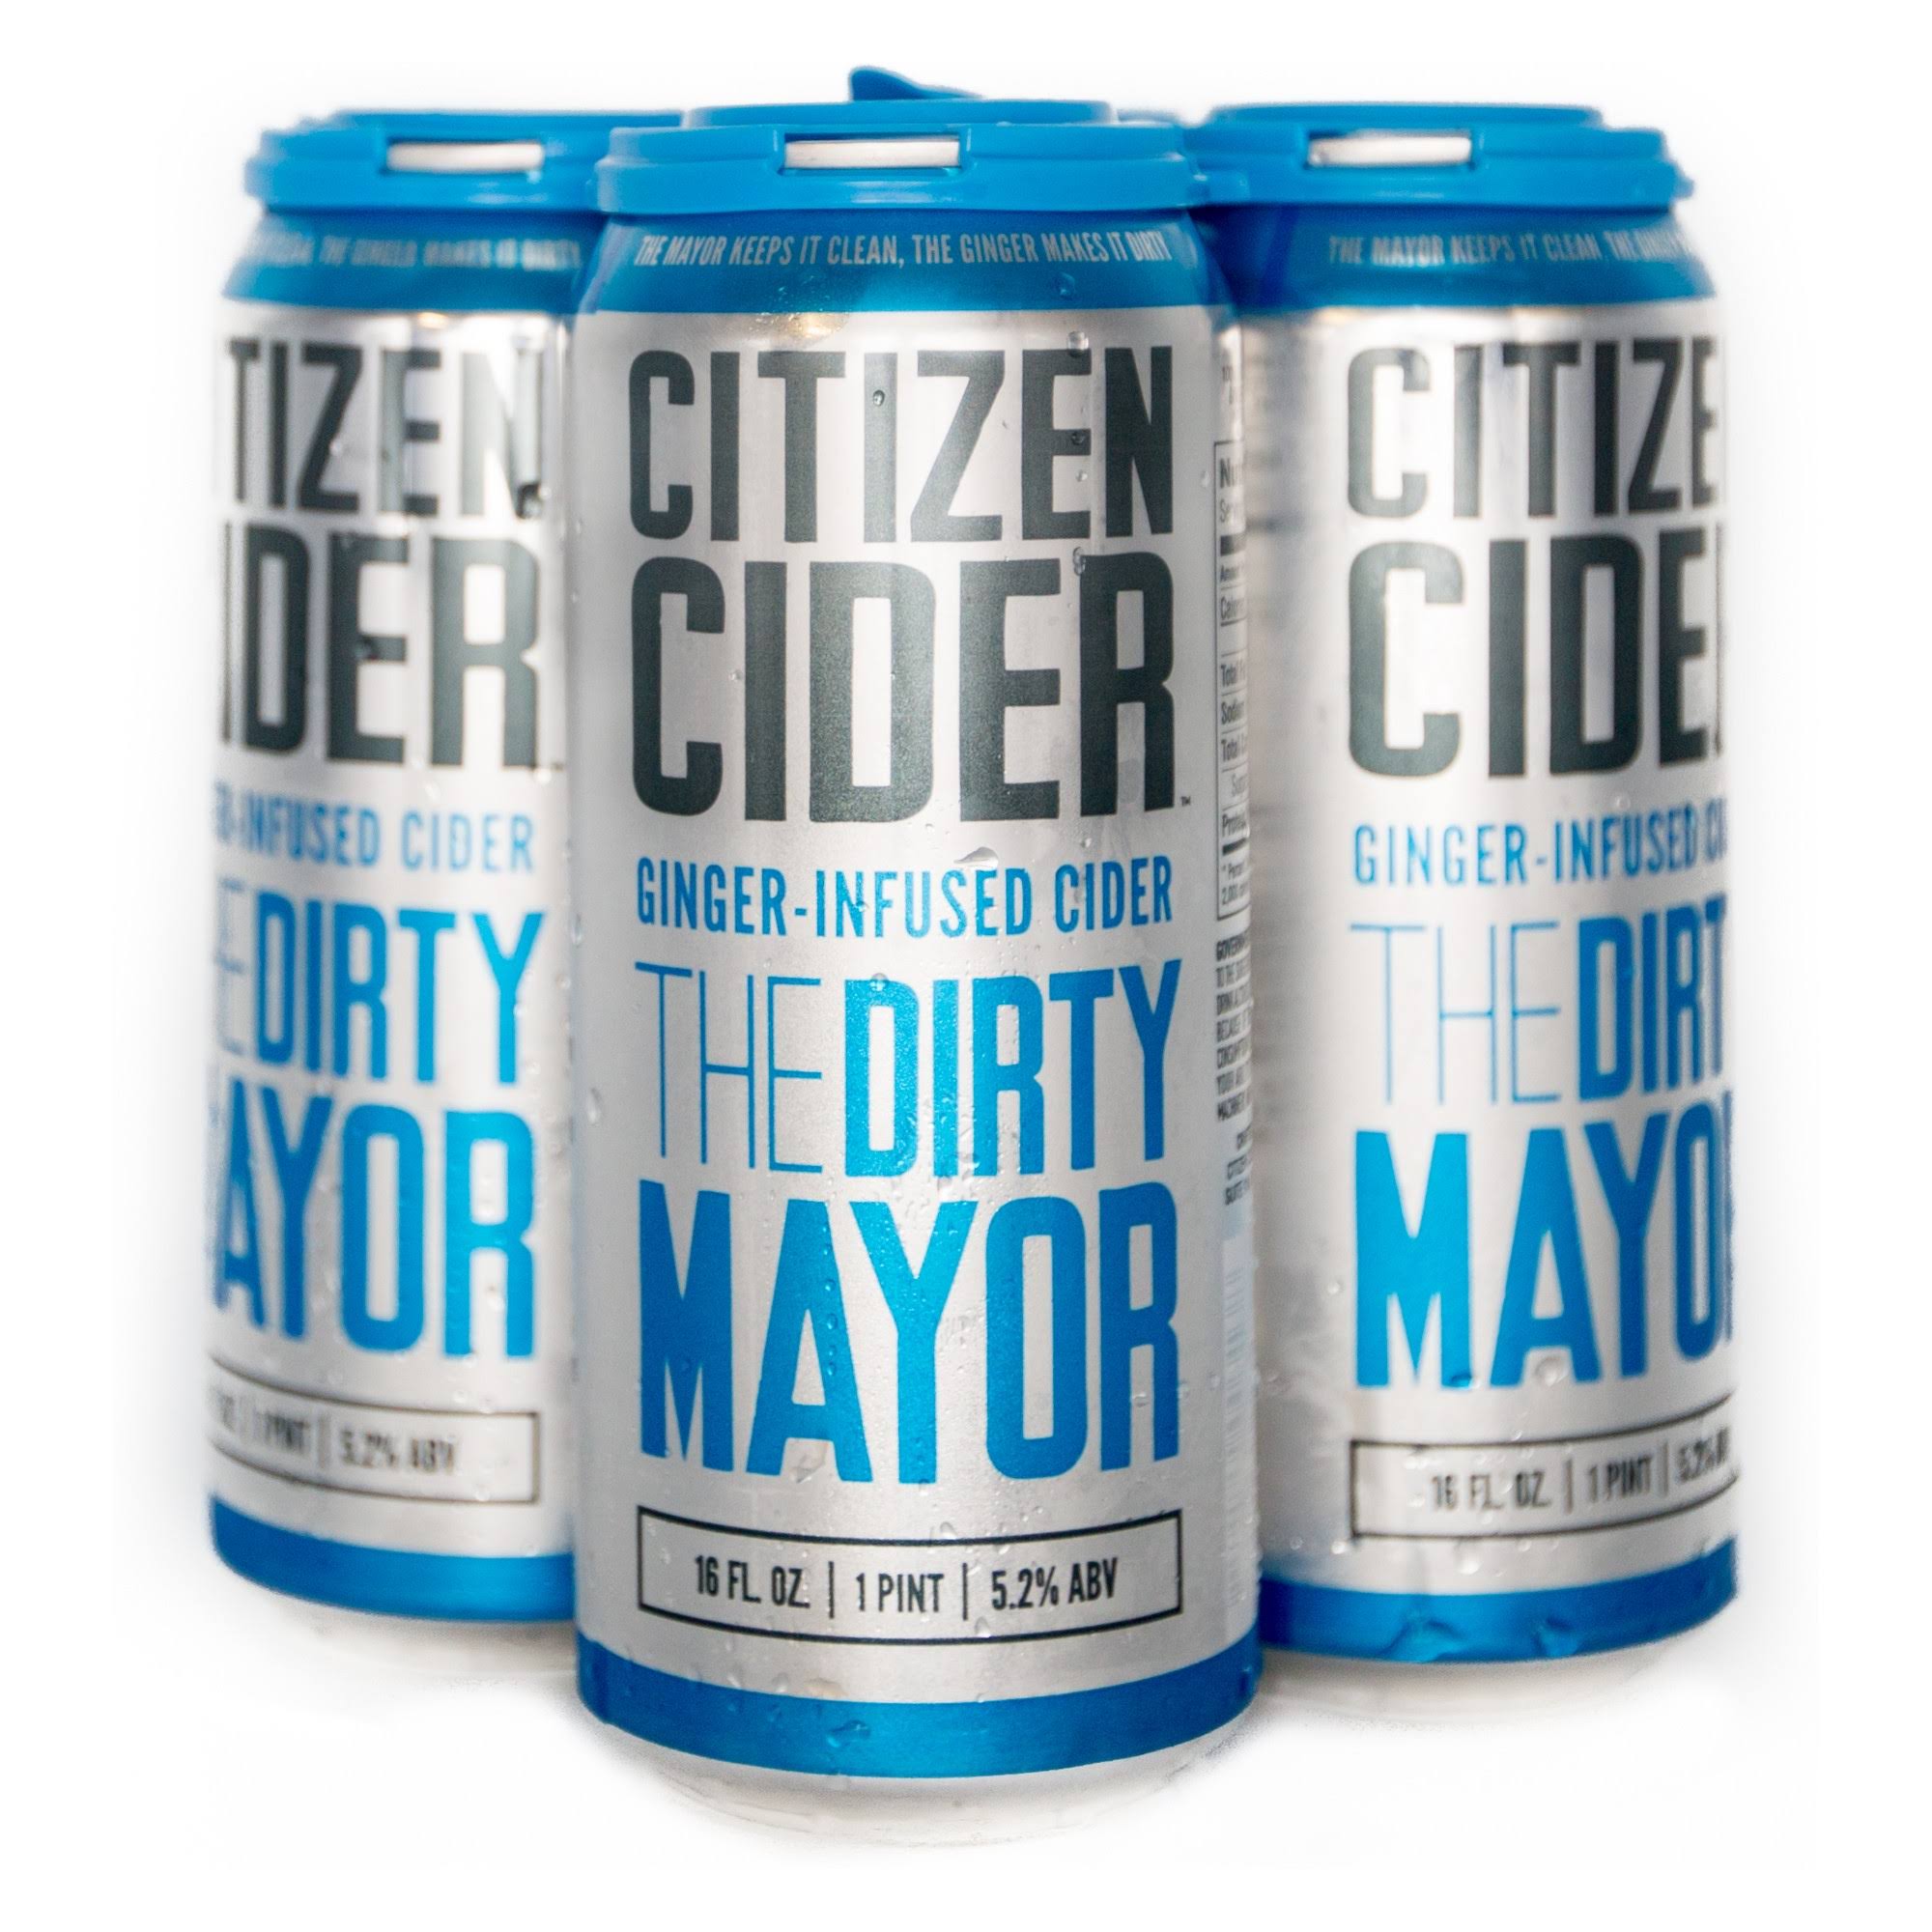 Citizen Cider The Dirty Mayor Beer